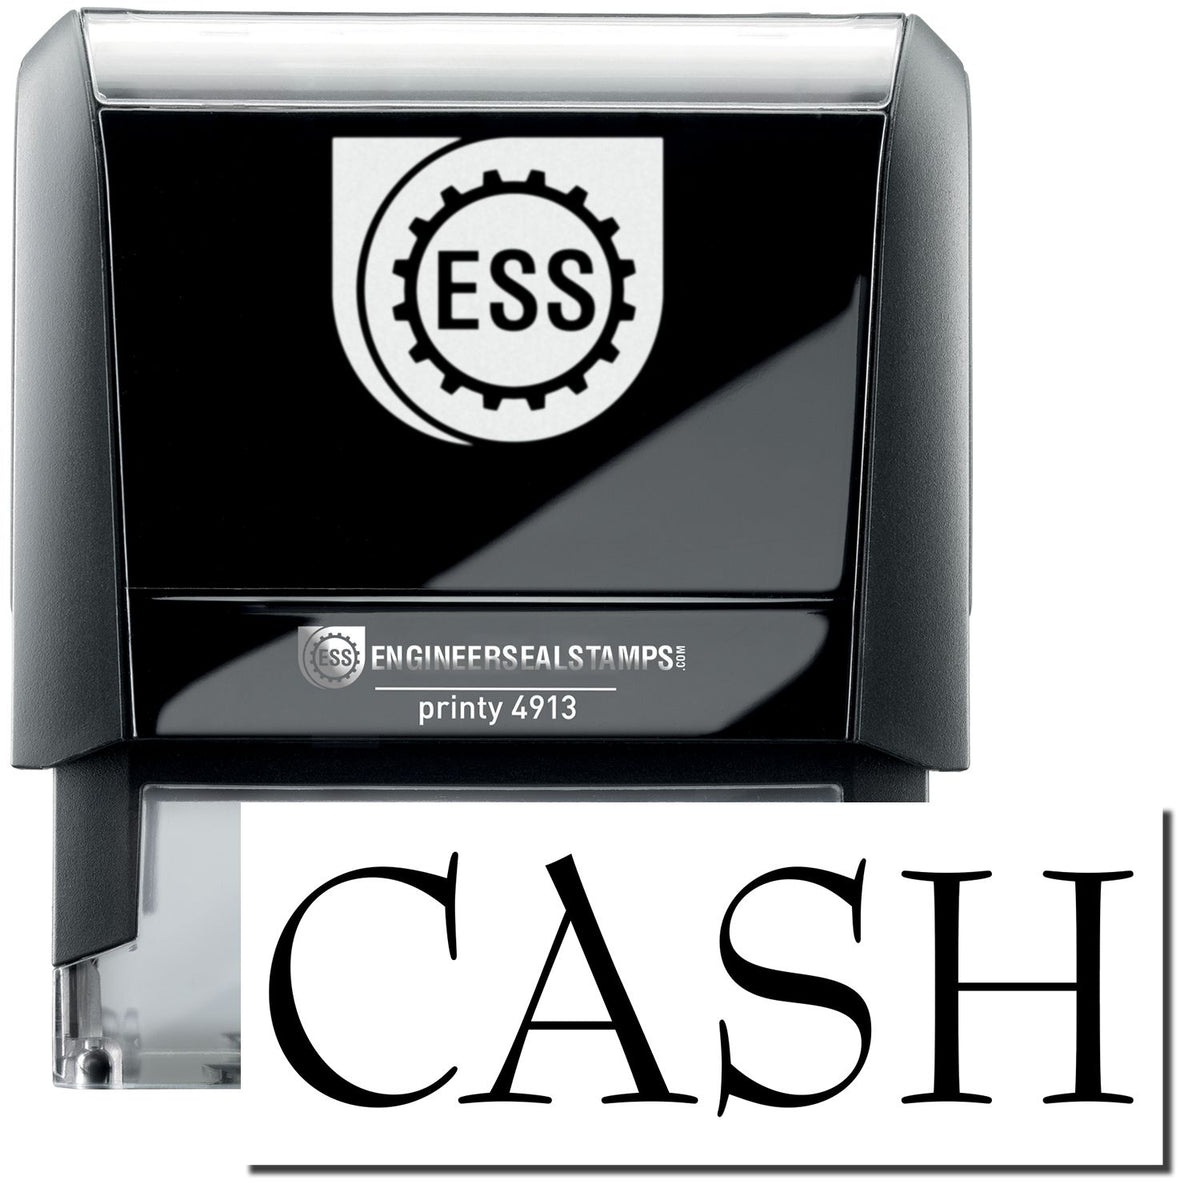 A self-inking stamp with a stamped image showing how the text &quot;CASH&quot; in a large bold font is displayed by it.